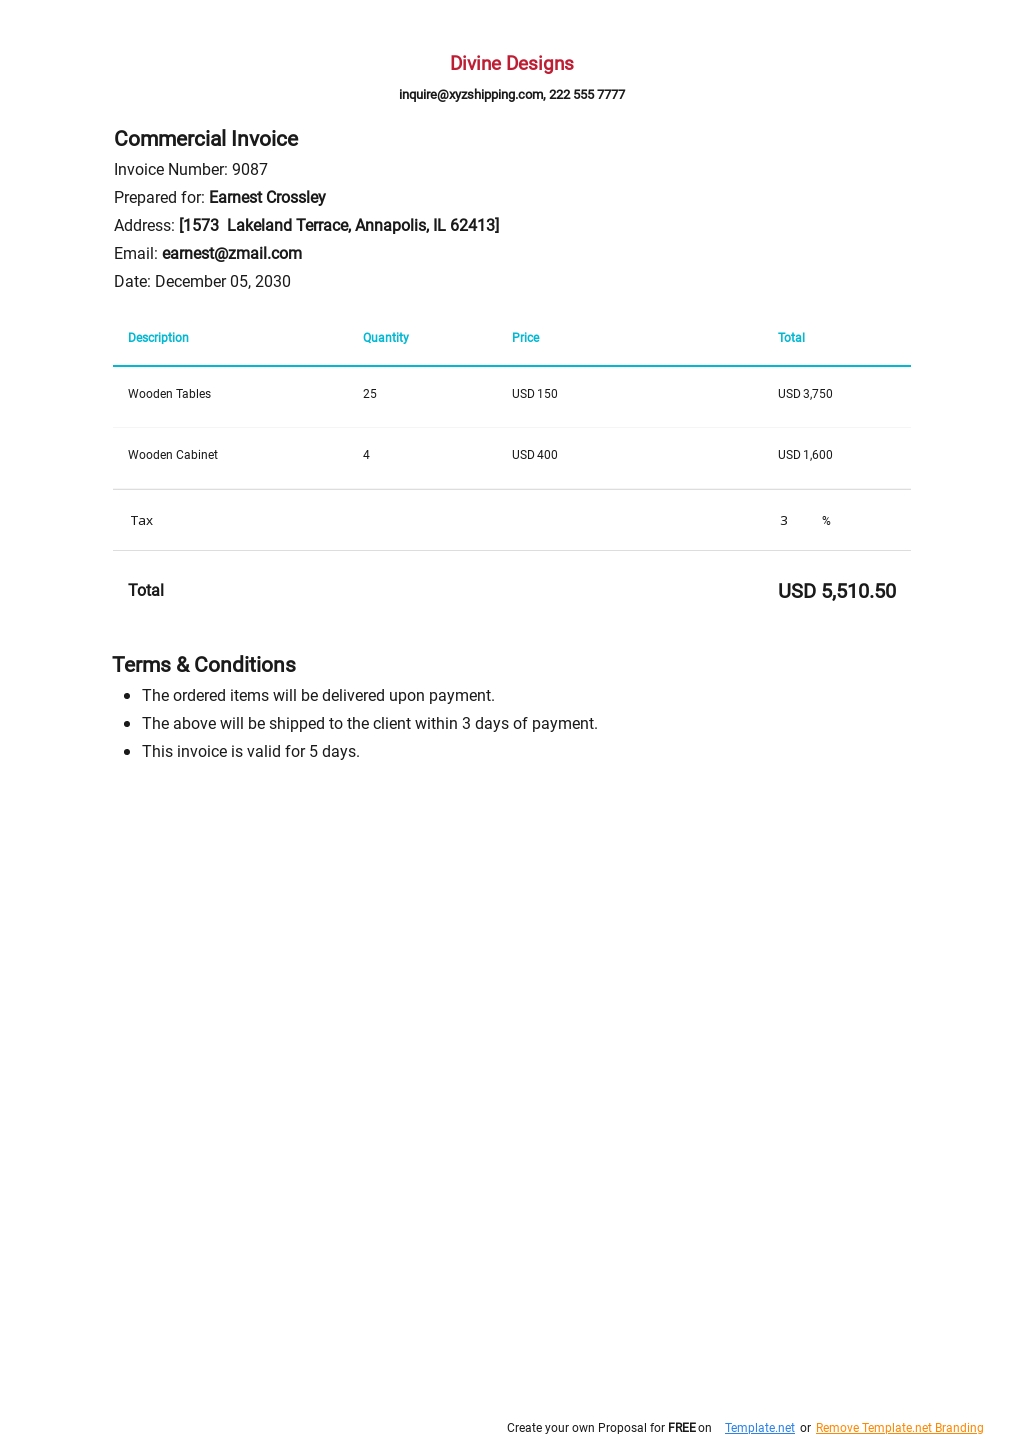 commercial invoice templates